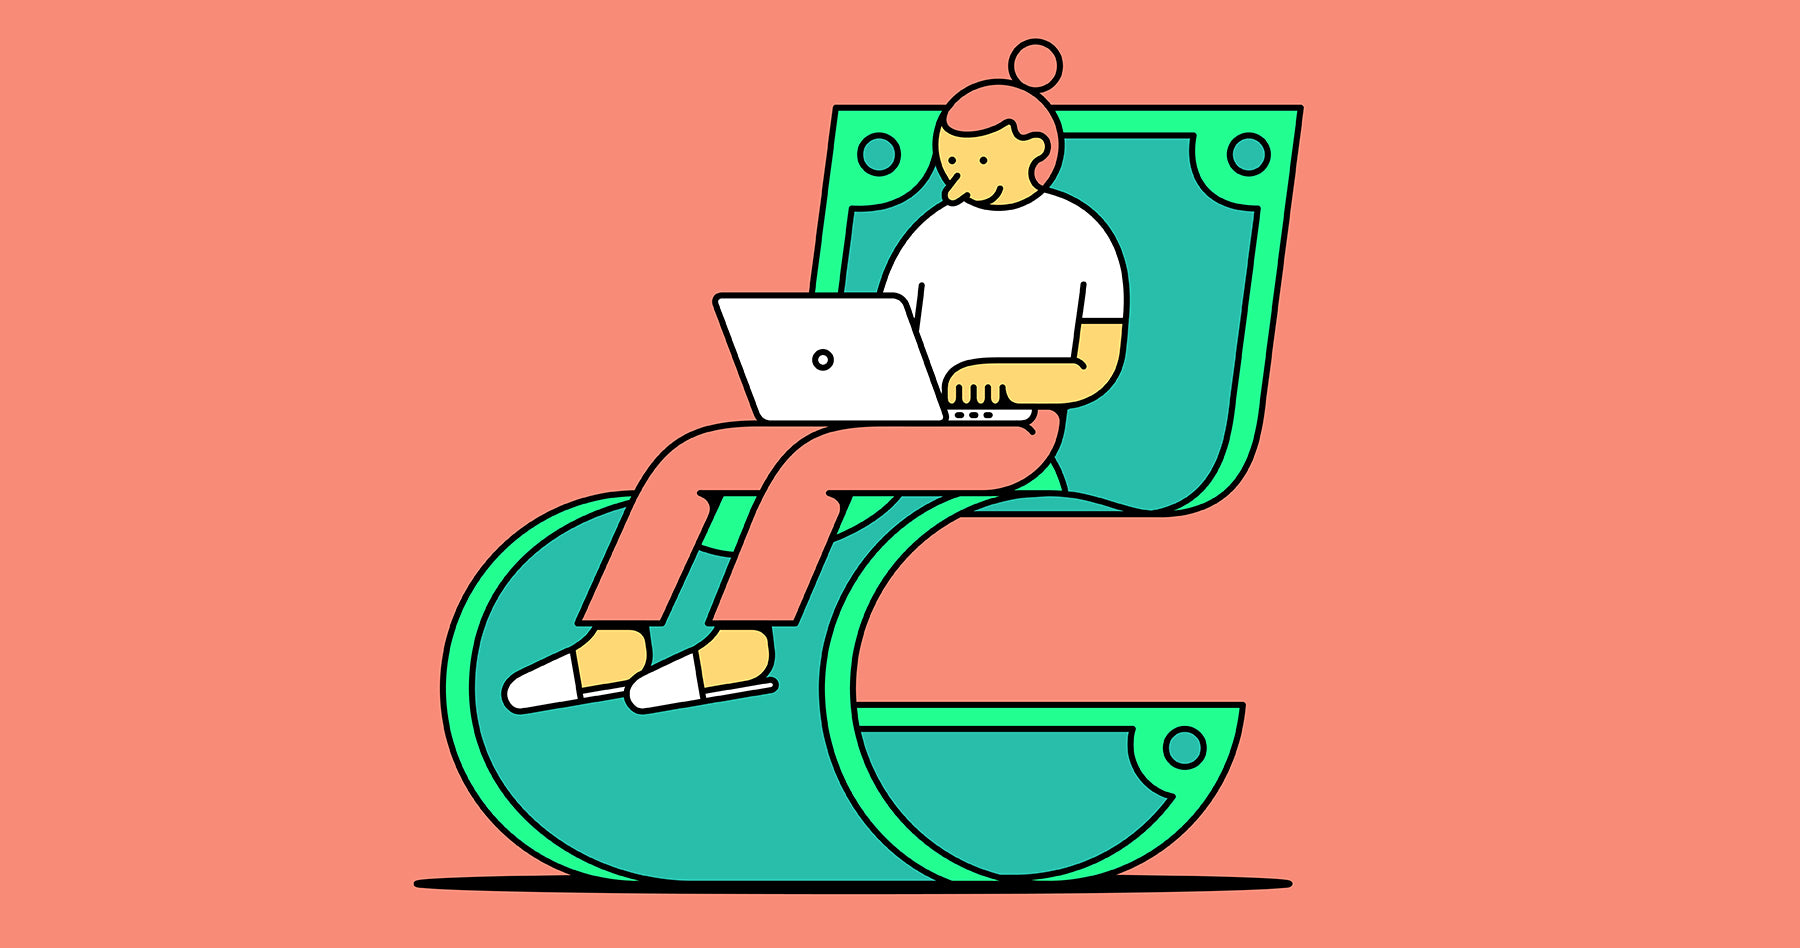 Illustration of a young woman working on a lounge chair made from a dollar bill with laptop on her lap